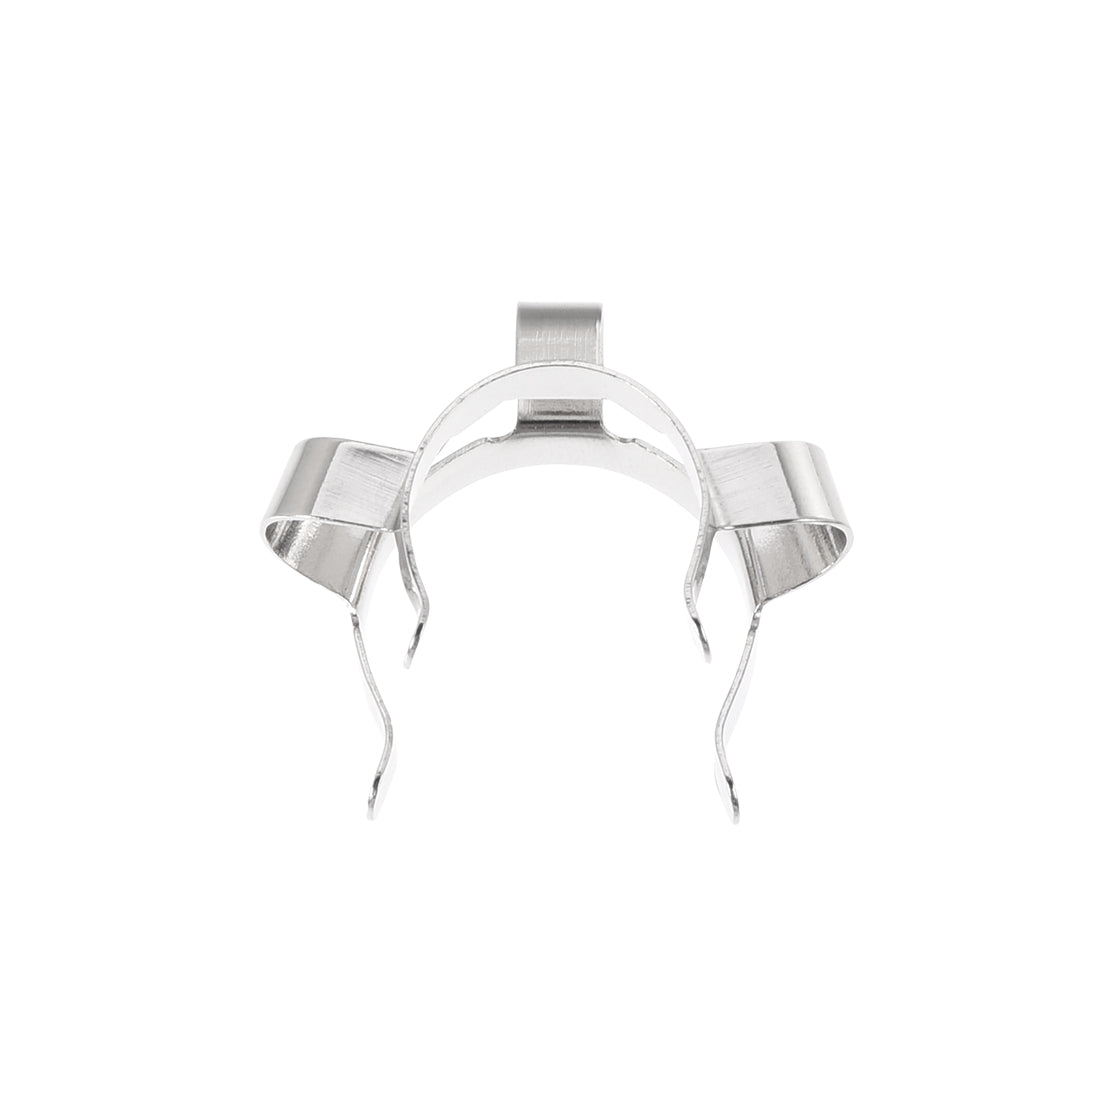 uxcell Uxcell Joint Clip Lab Clamp Mounting Clips for Glass Taper Joints Laboratory Tool Silver Tone